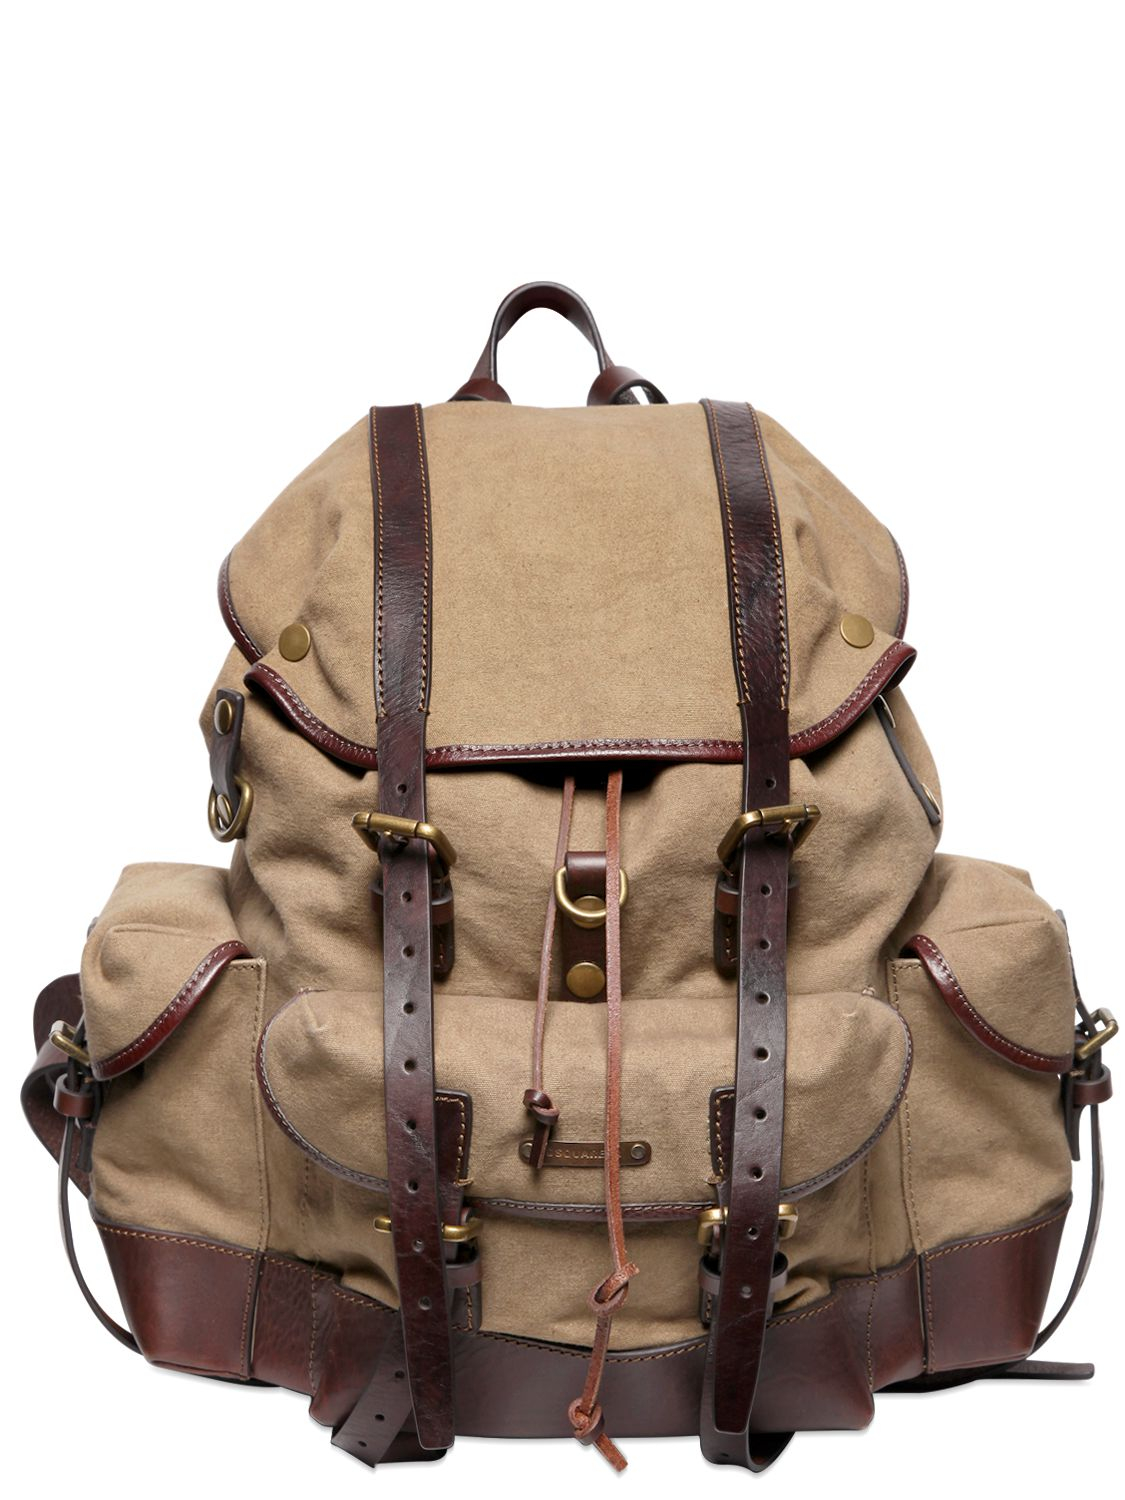 DSquared² Cotton Canvas Leather Backpack in Natural for Men - Lyst